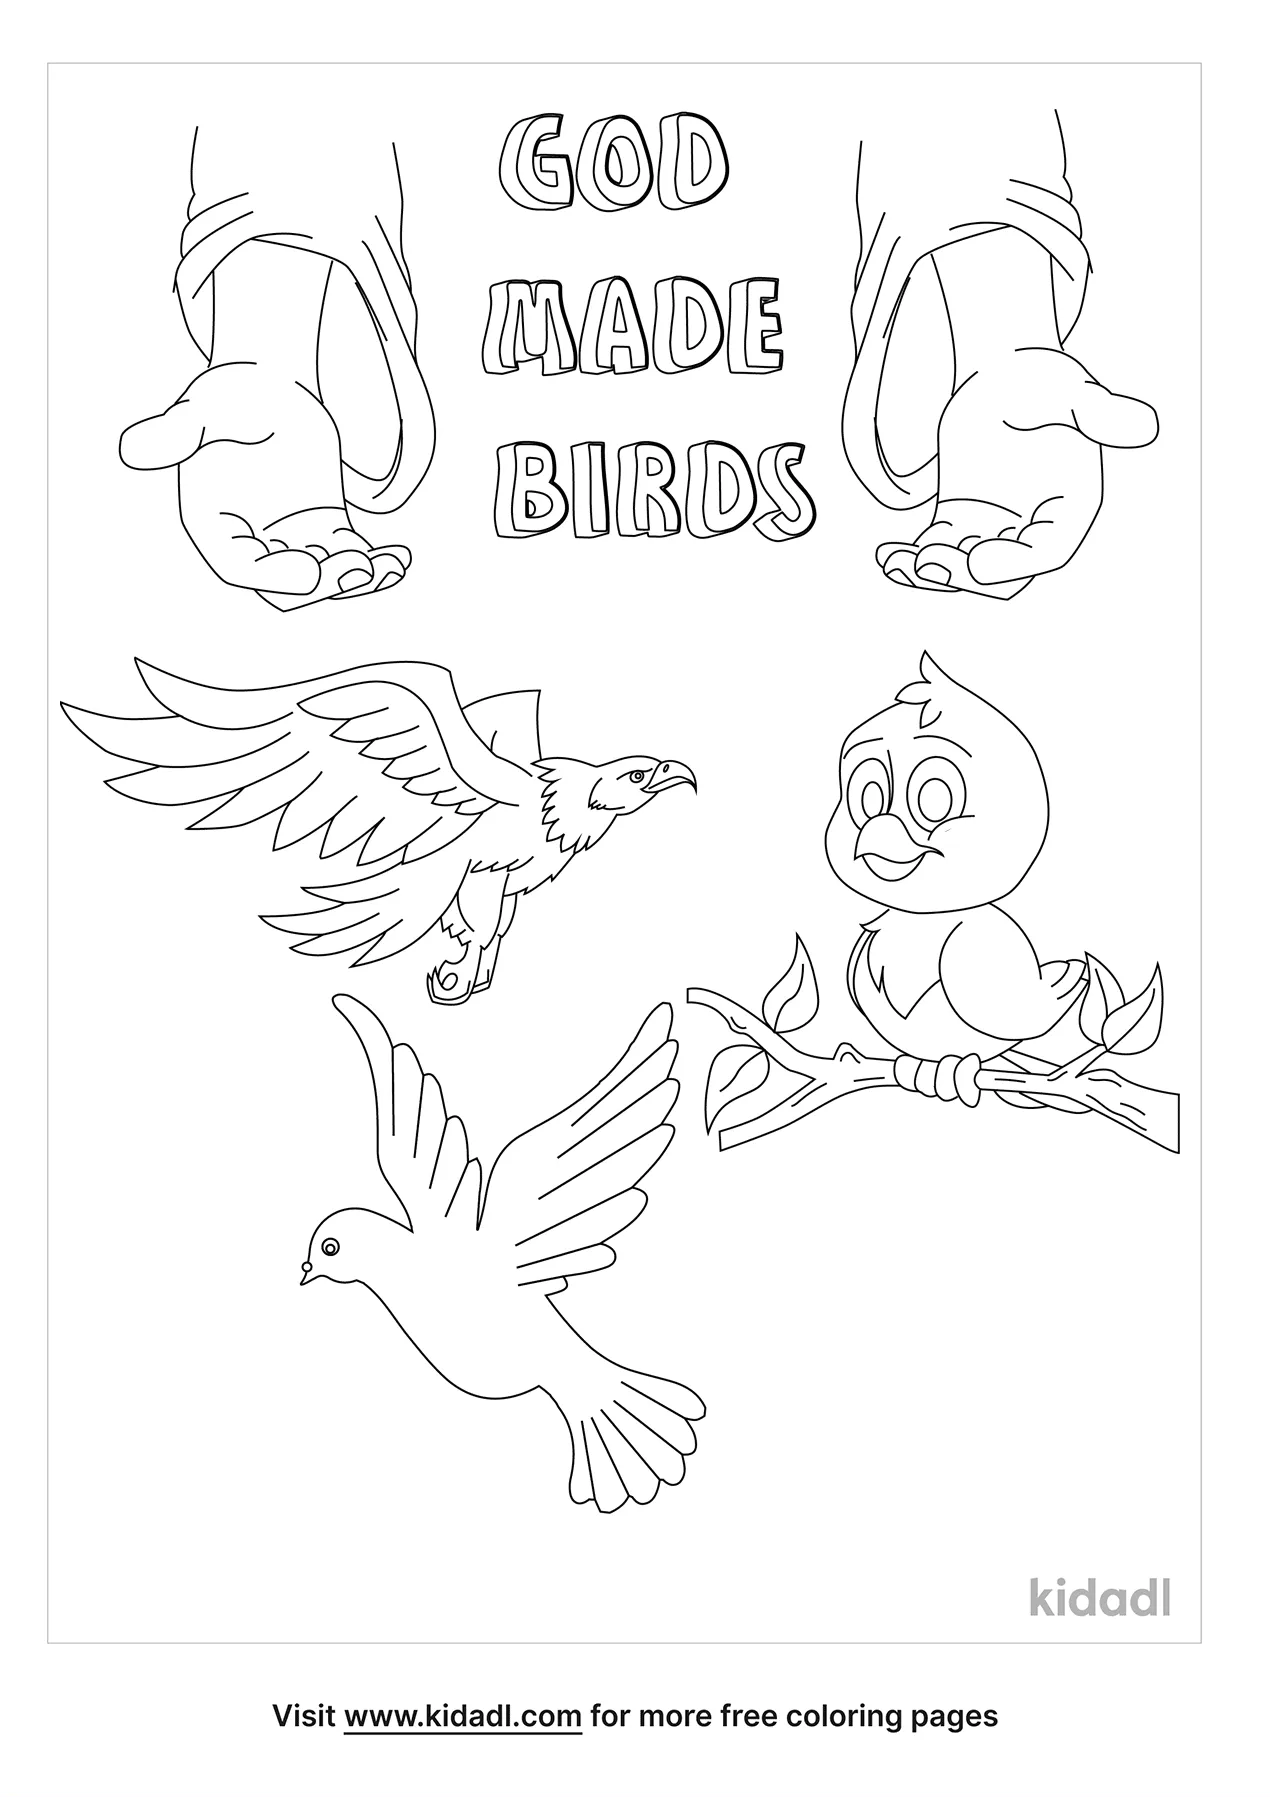 God Made Birds Coloring Page